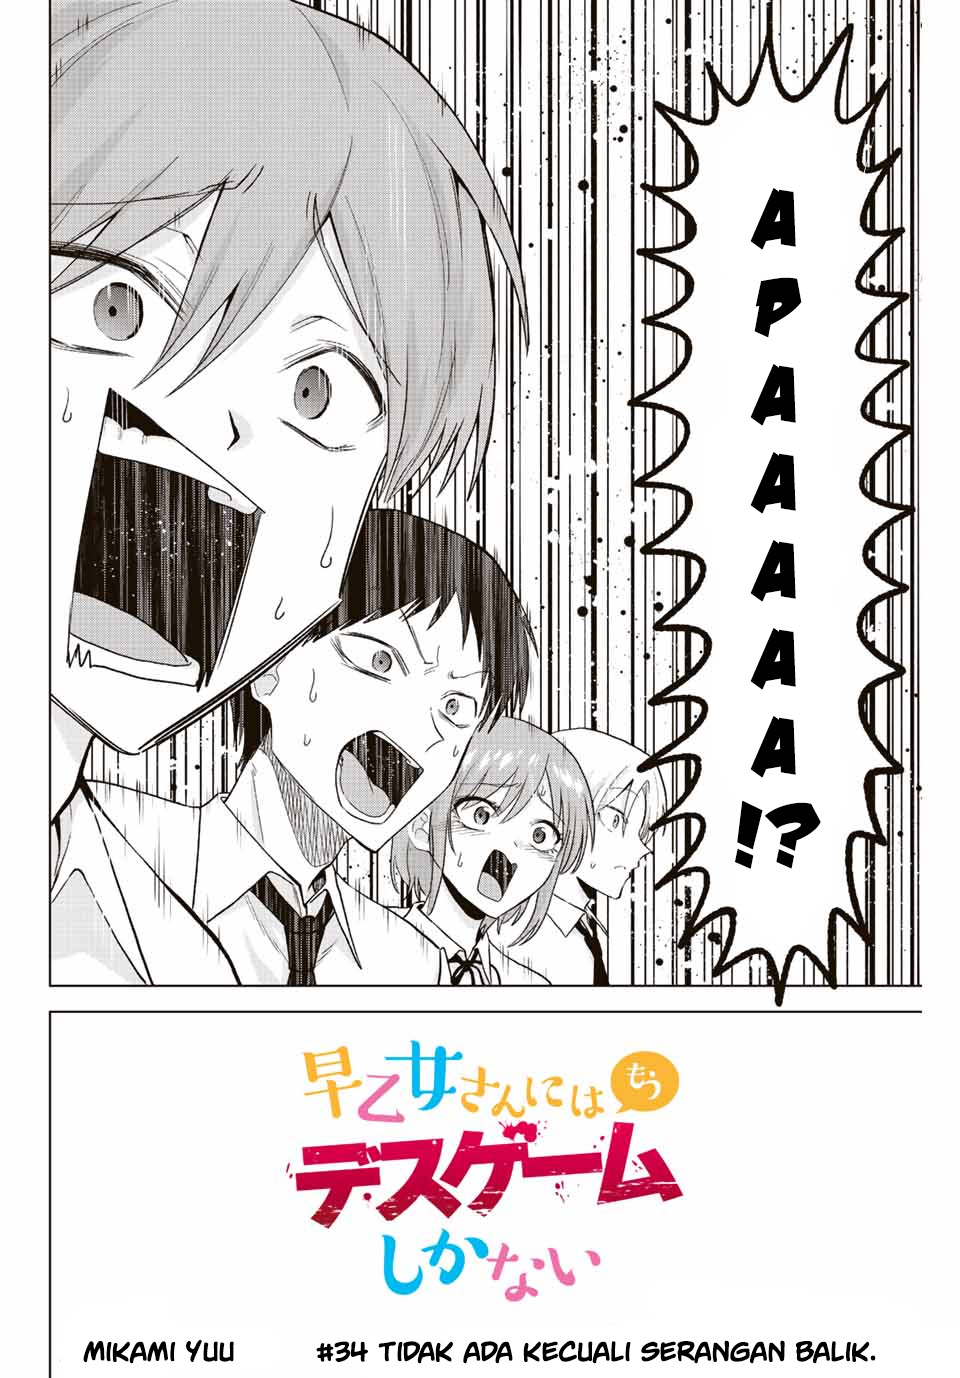 The Death Game Is All That Saotome-san Has Left Chapter 34